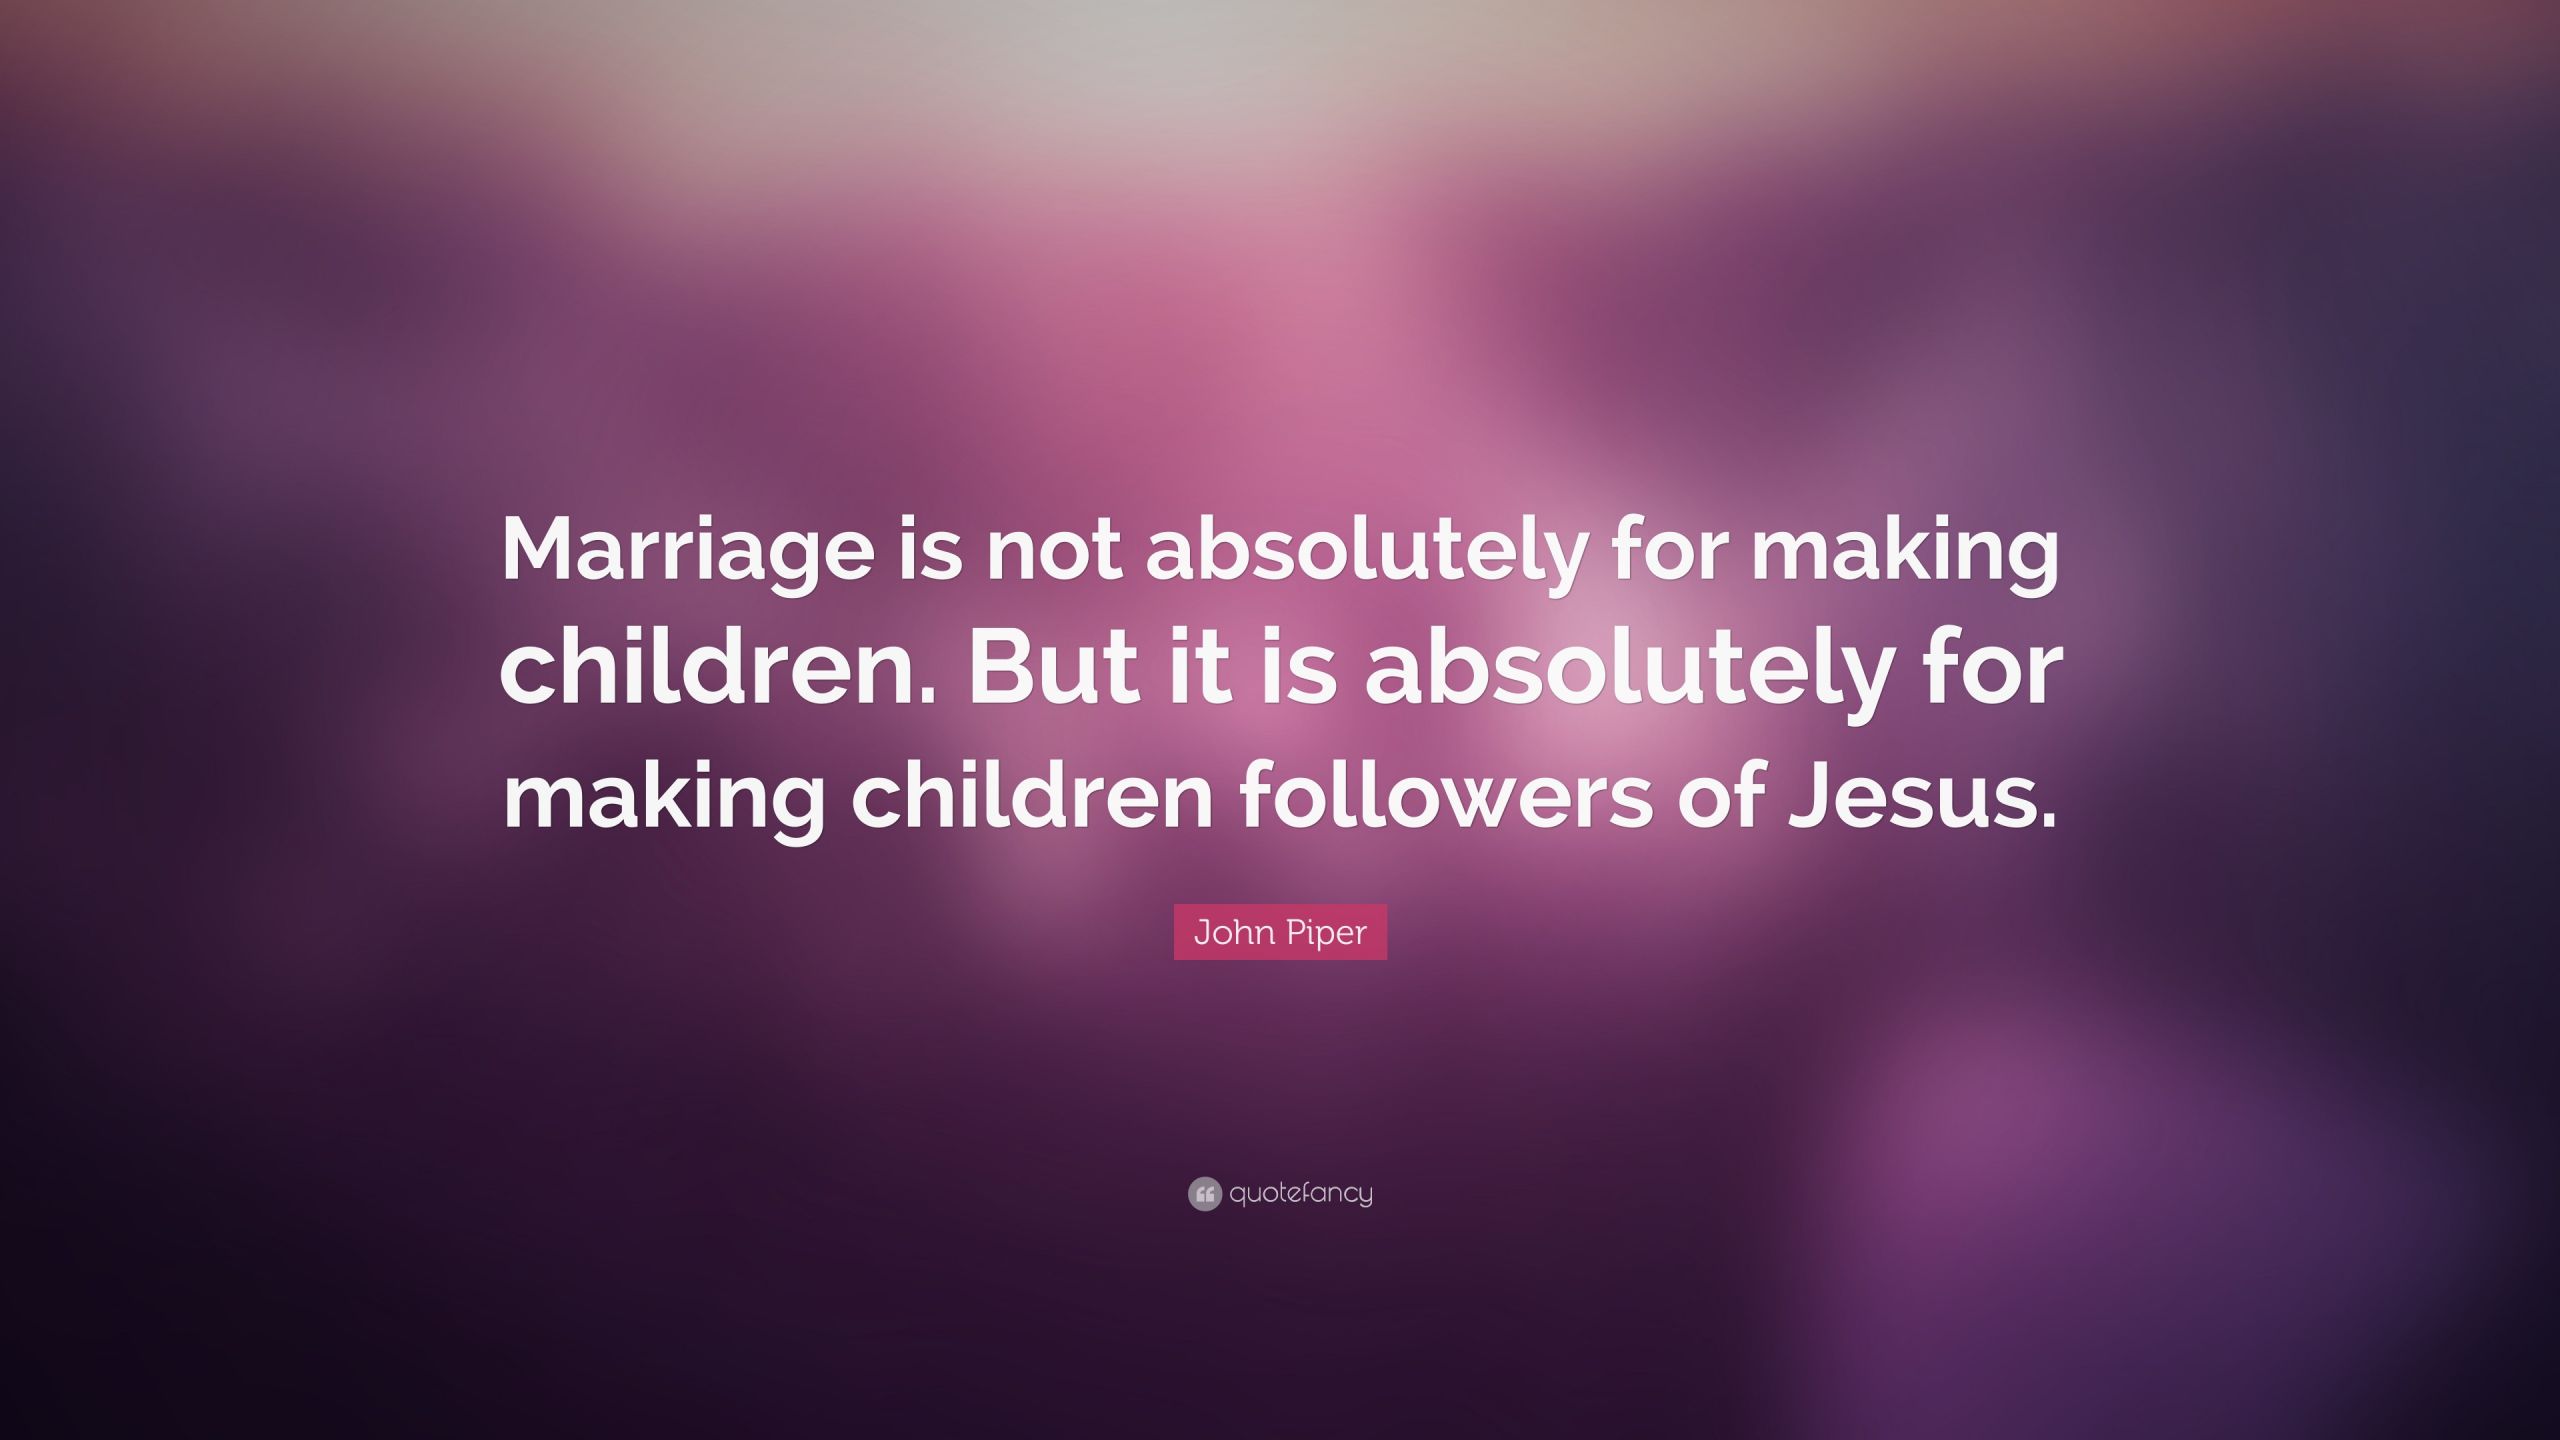 John Piper Marriage Quotes
 John Piper Quote “Marriage is not absolutely for making